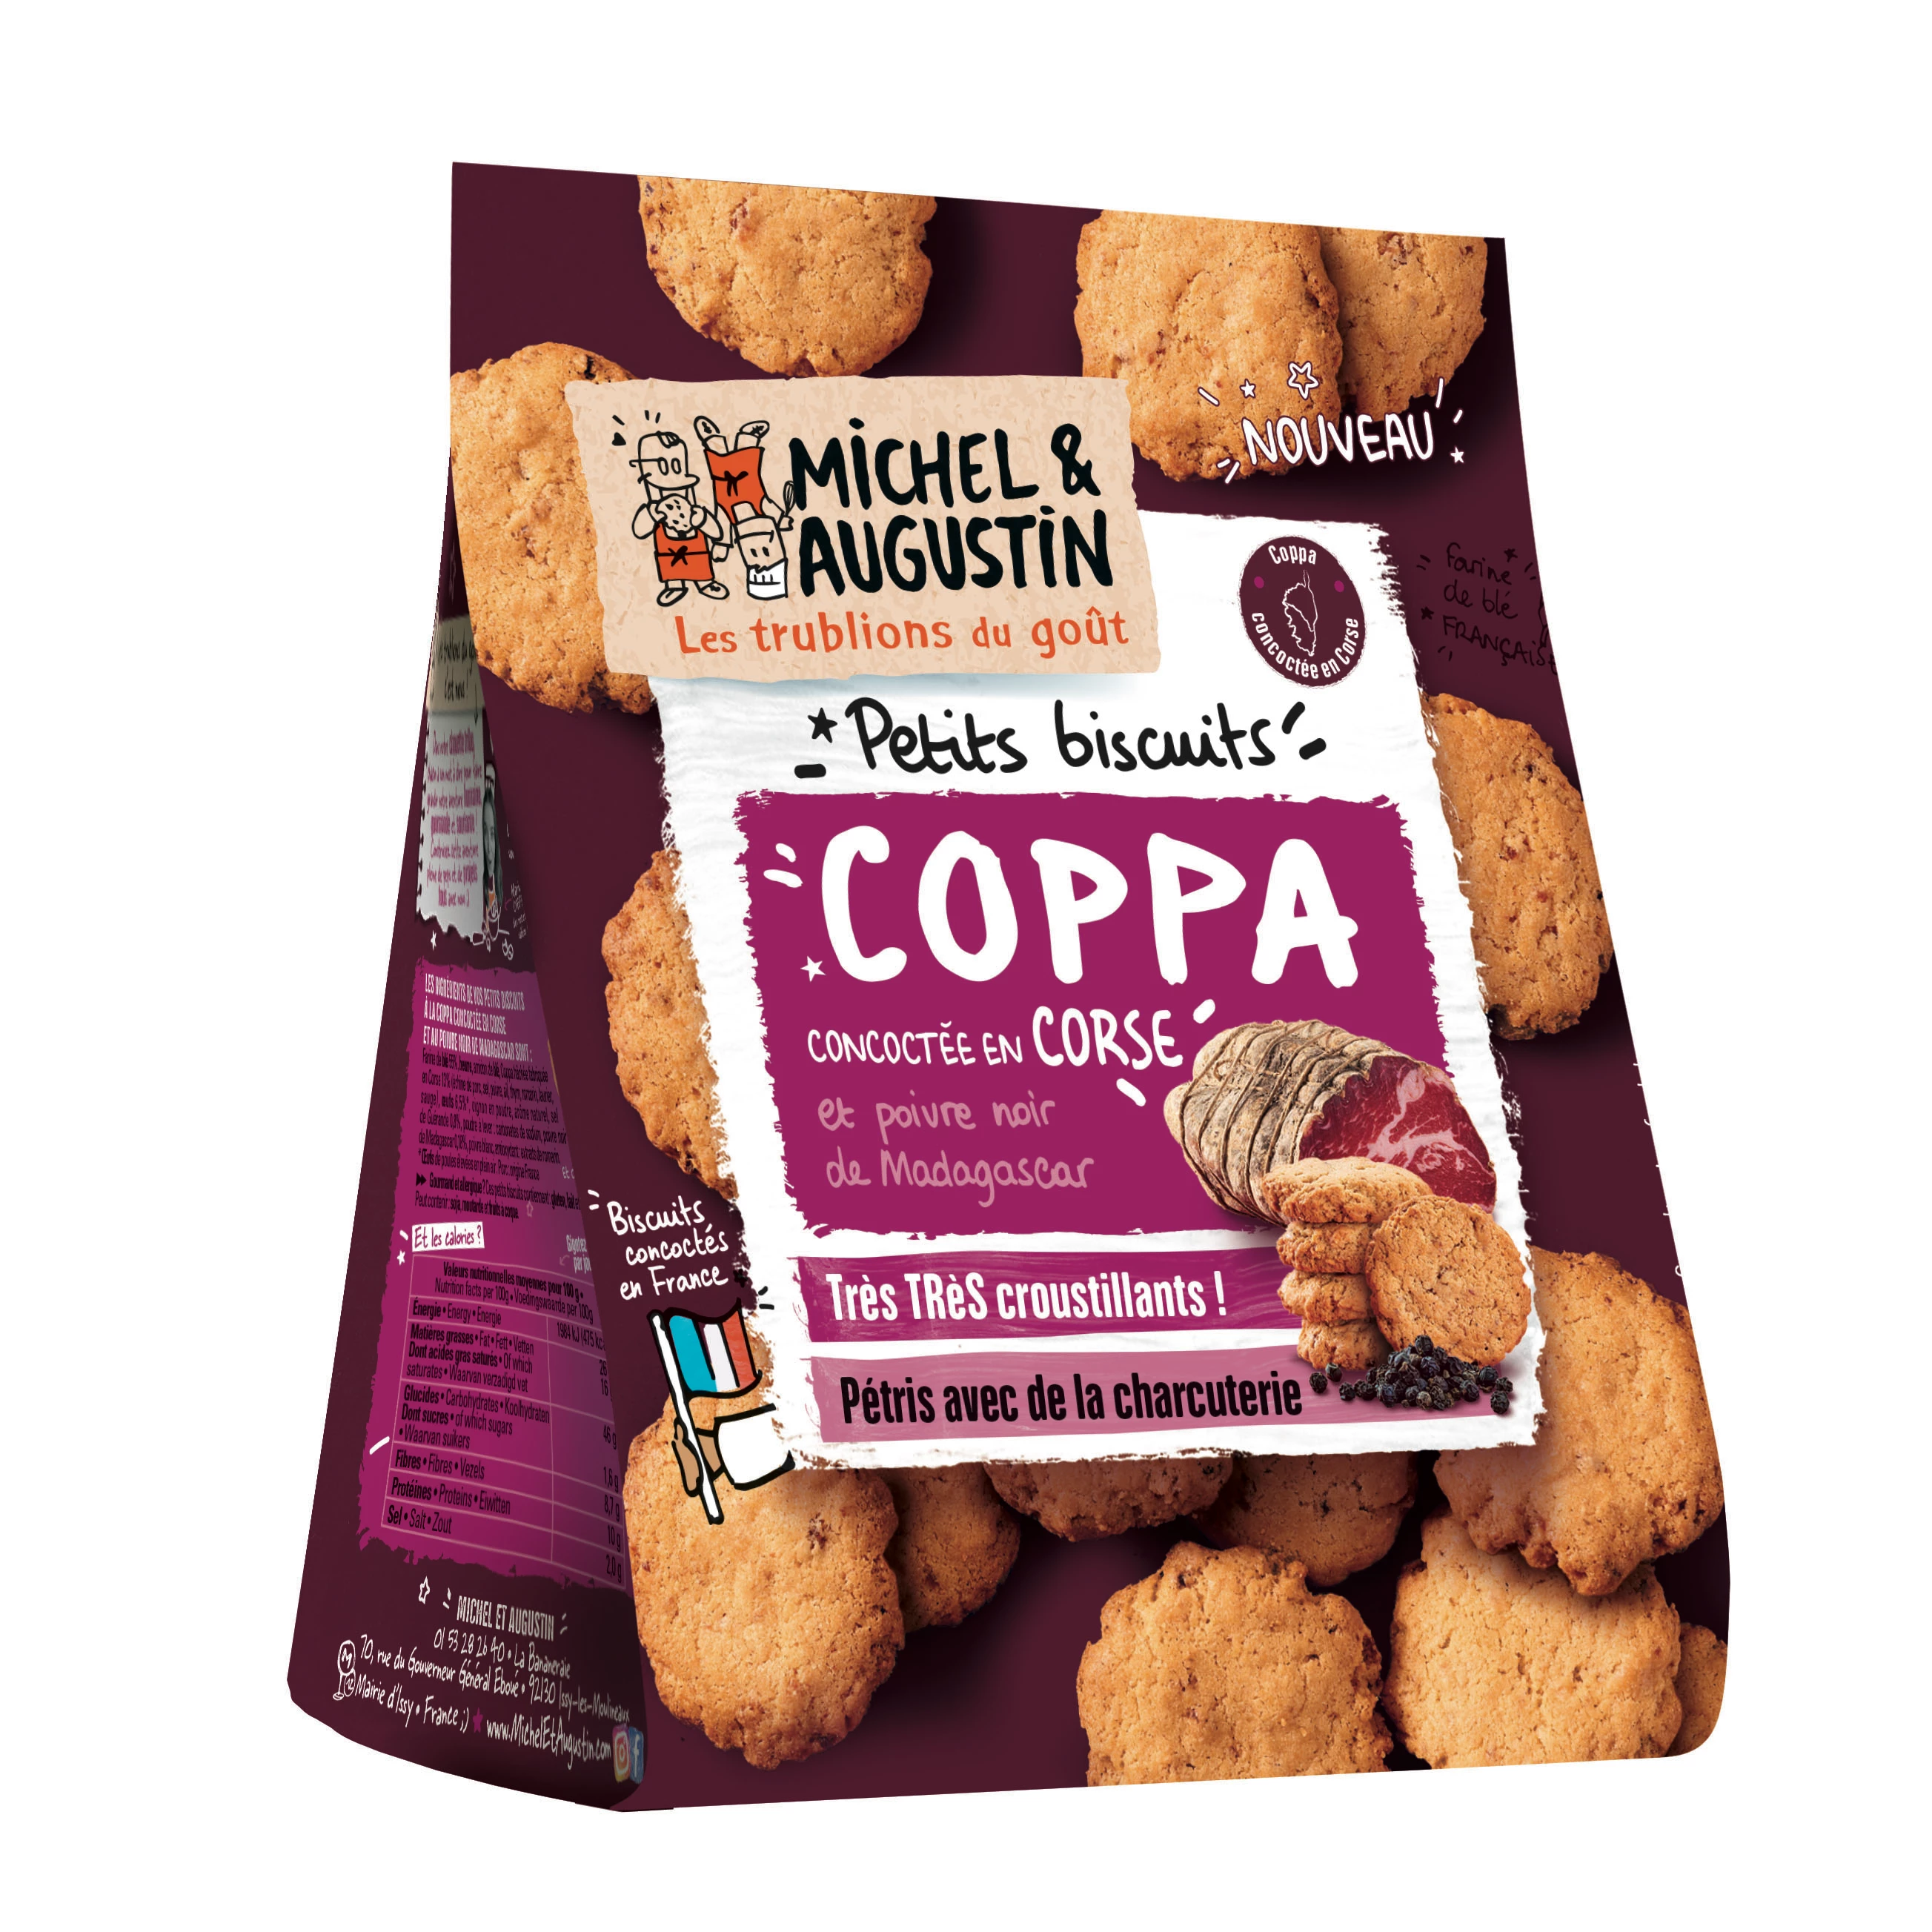 Small Coppa Black Pepper Biscuits from Madagascar, 90g - MICHEL ET AUGUSTIN